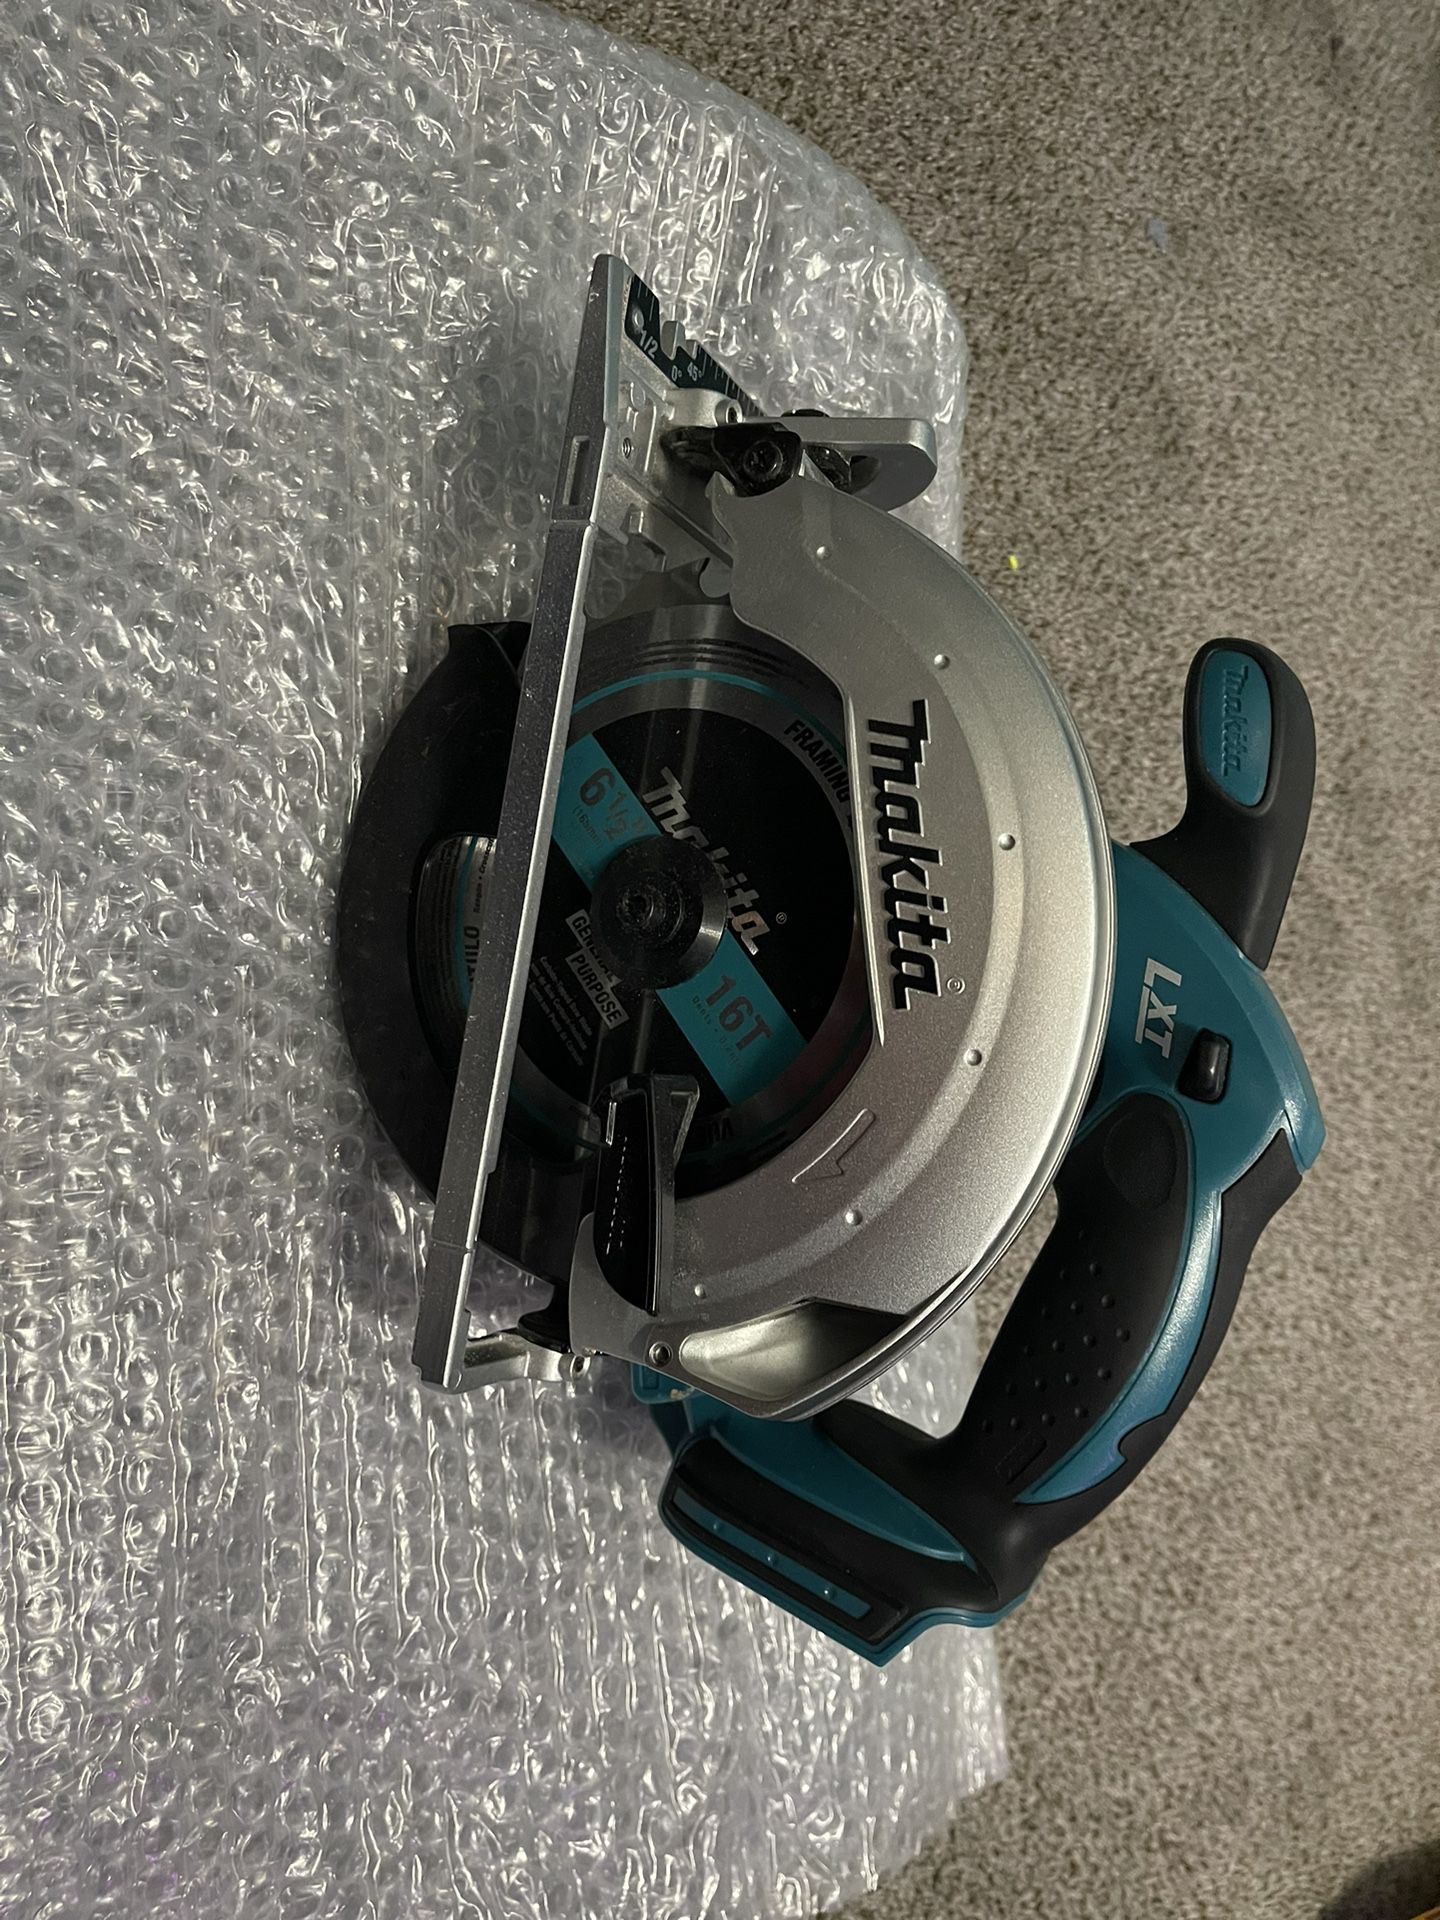 Makita 18V LXT Lithium-lon Cordless 6-1/2 in. Lightweight Circular Saw and General Purpose Blade